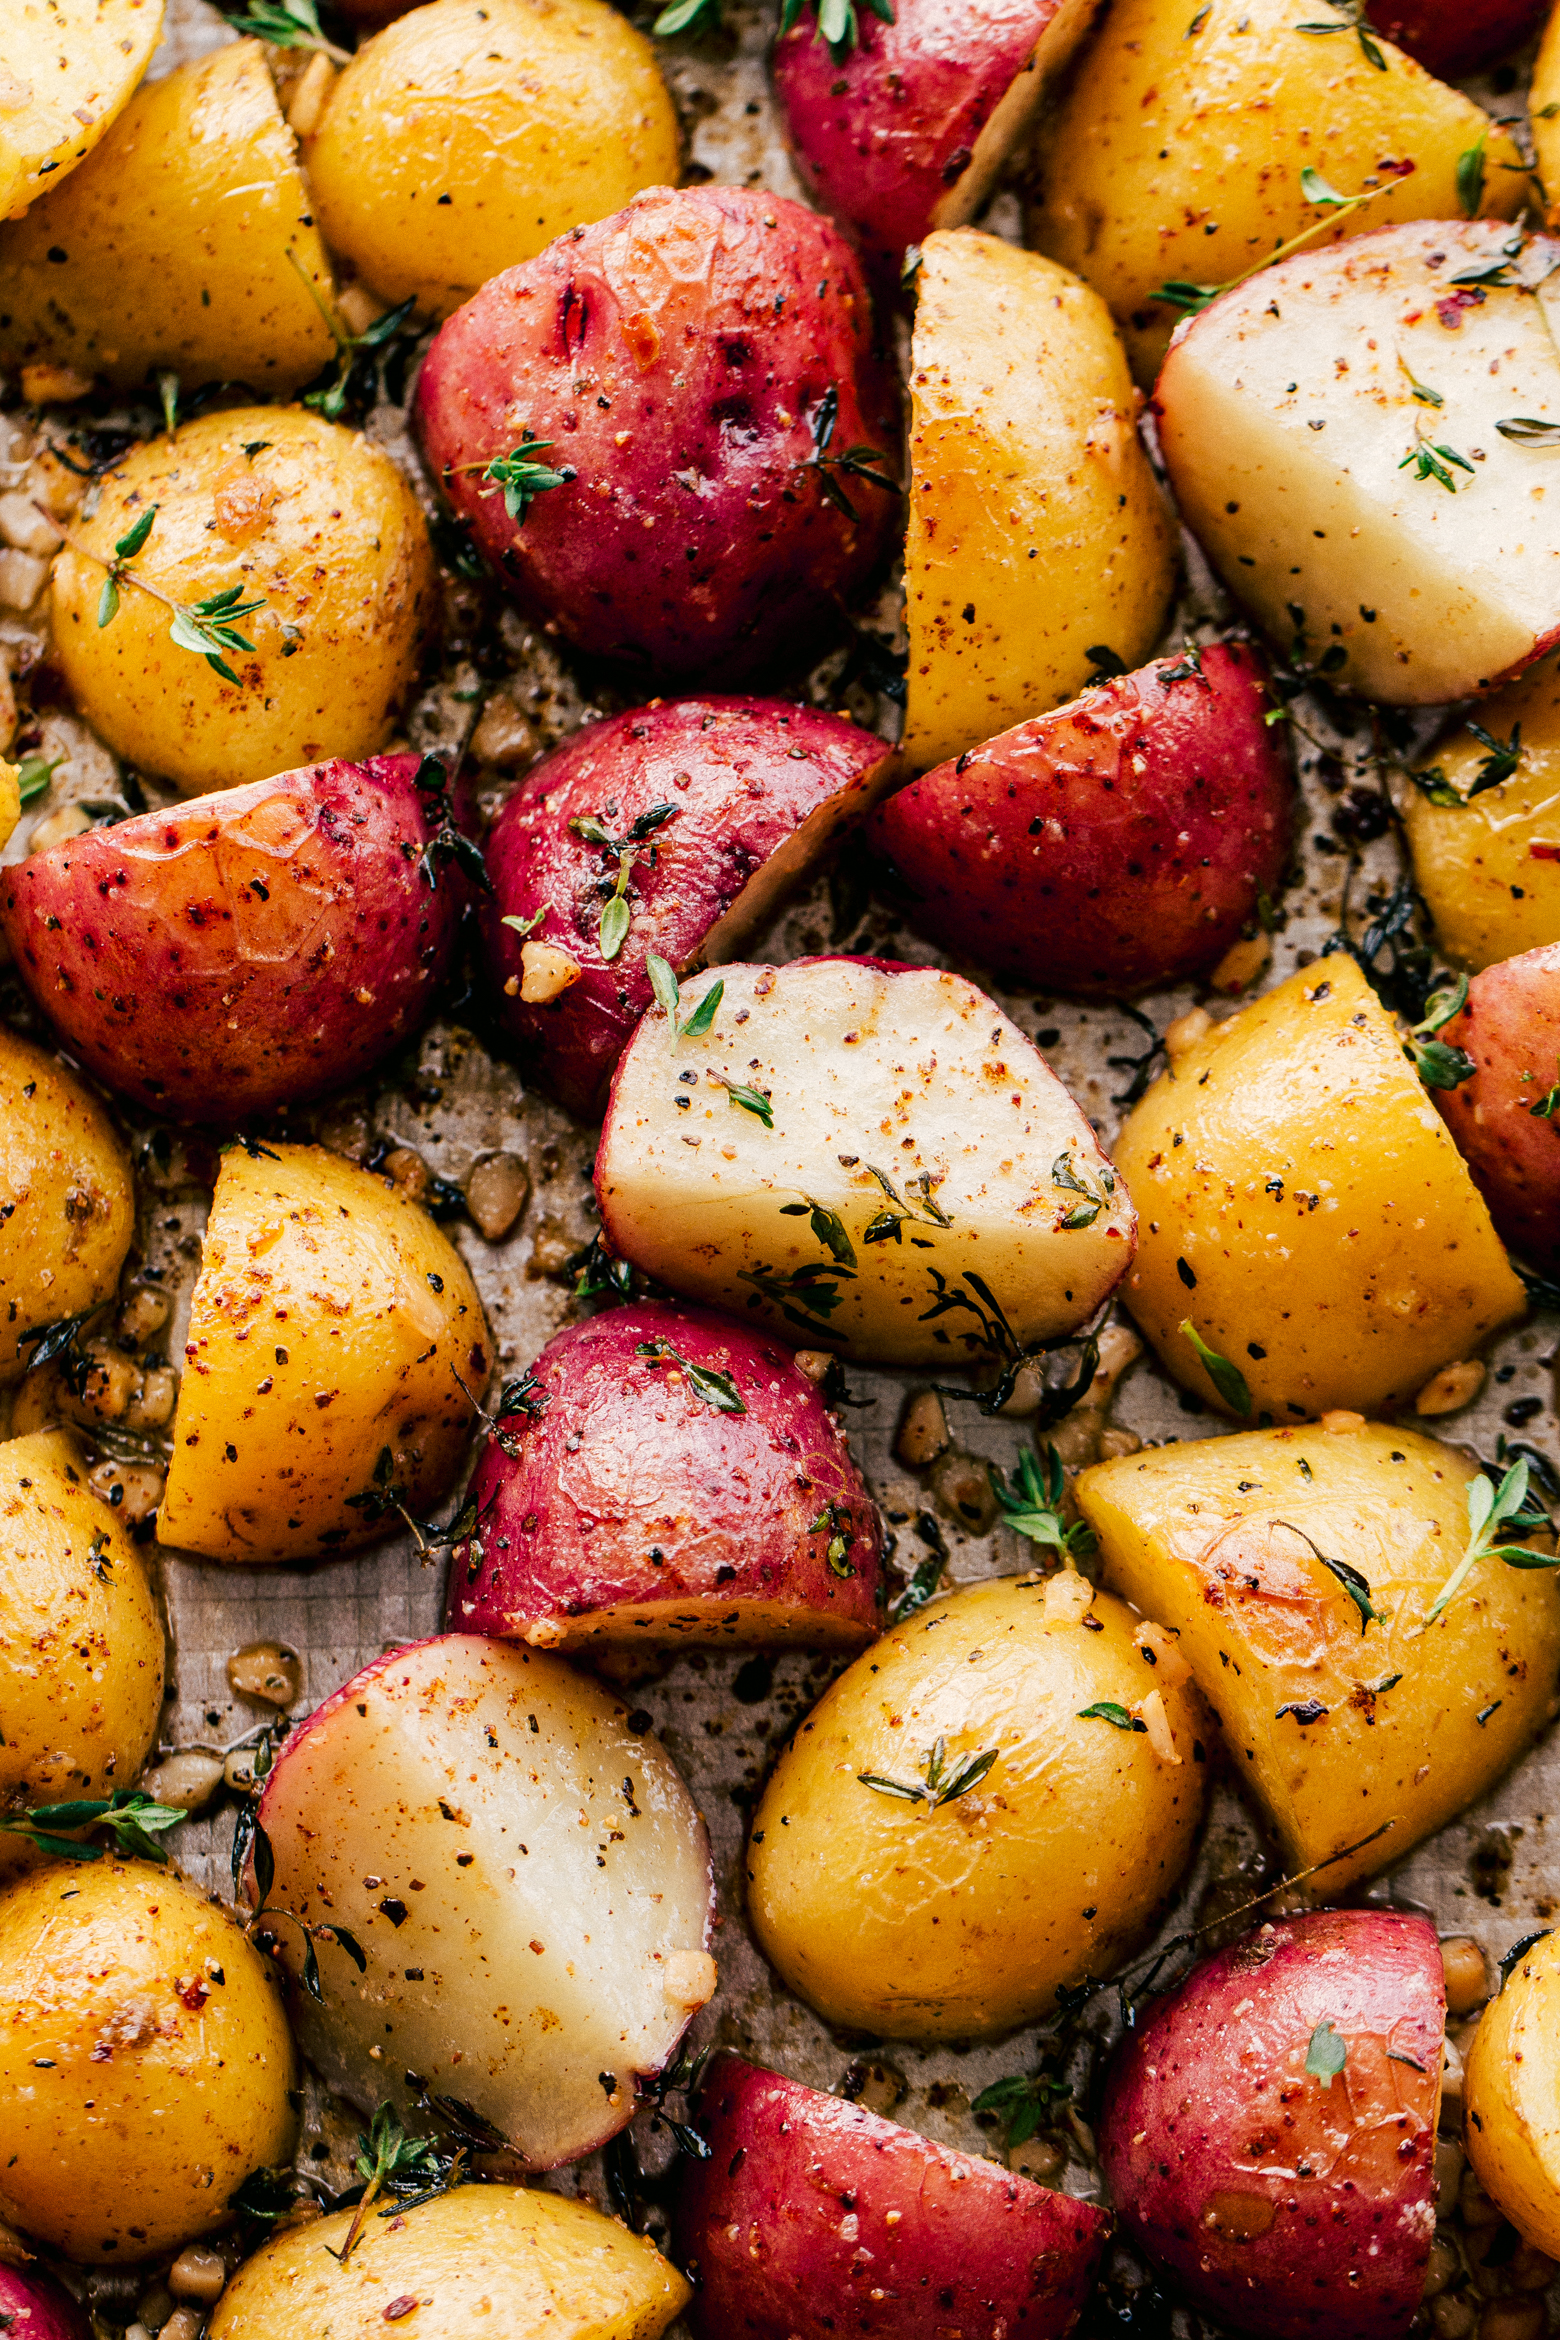 Roasted potatoes in garlic butter topped chopped rosemary by the food cafe. 